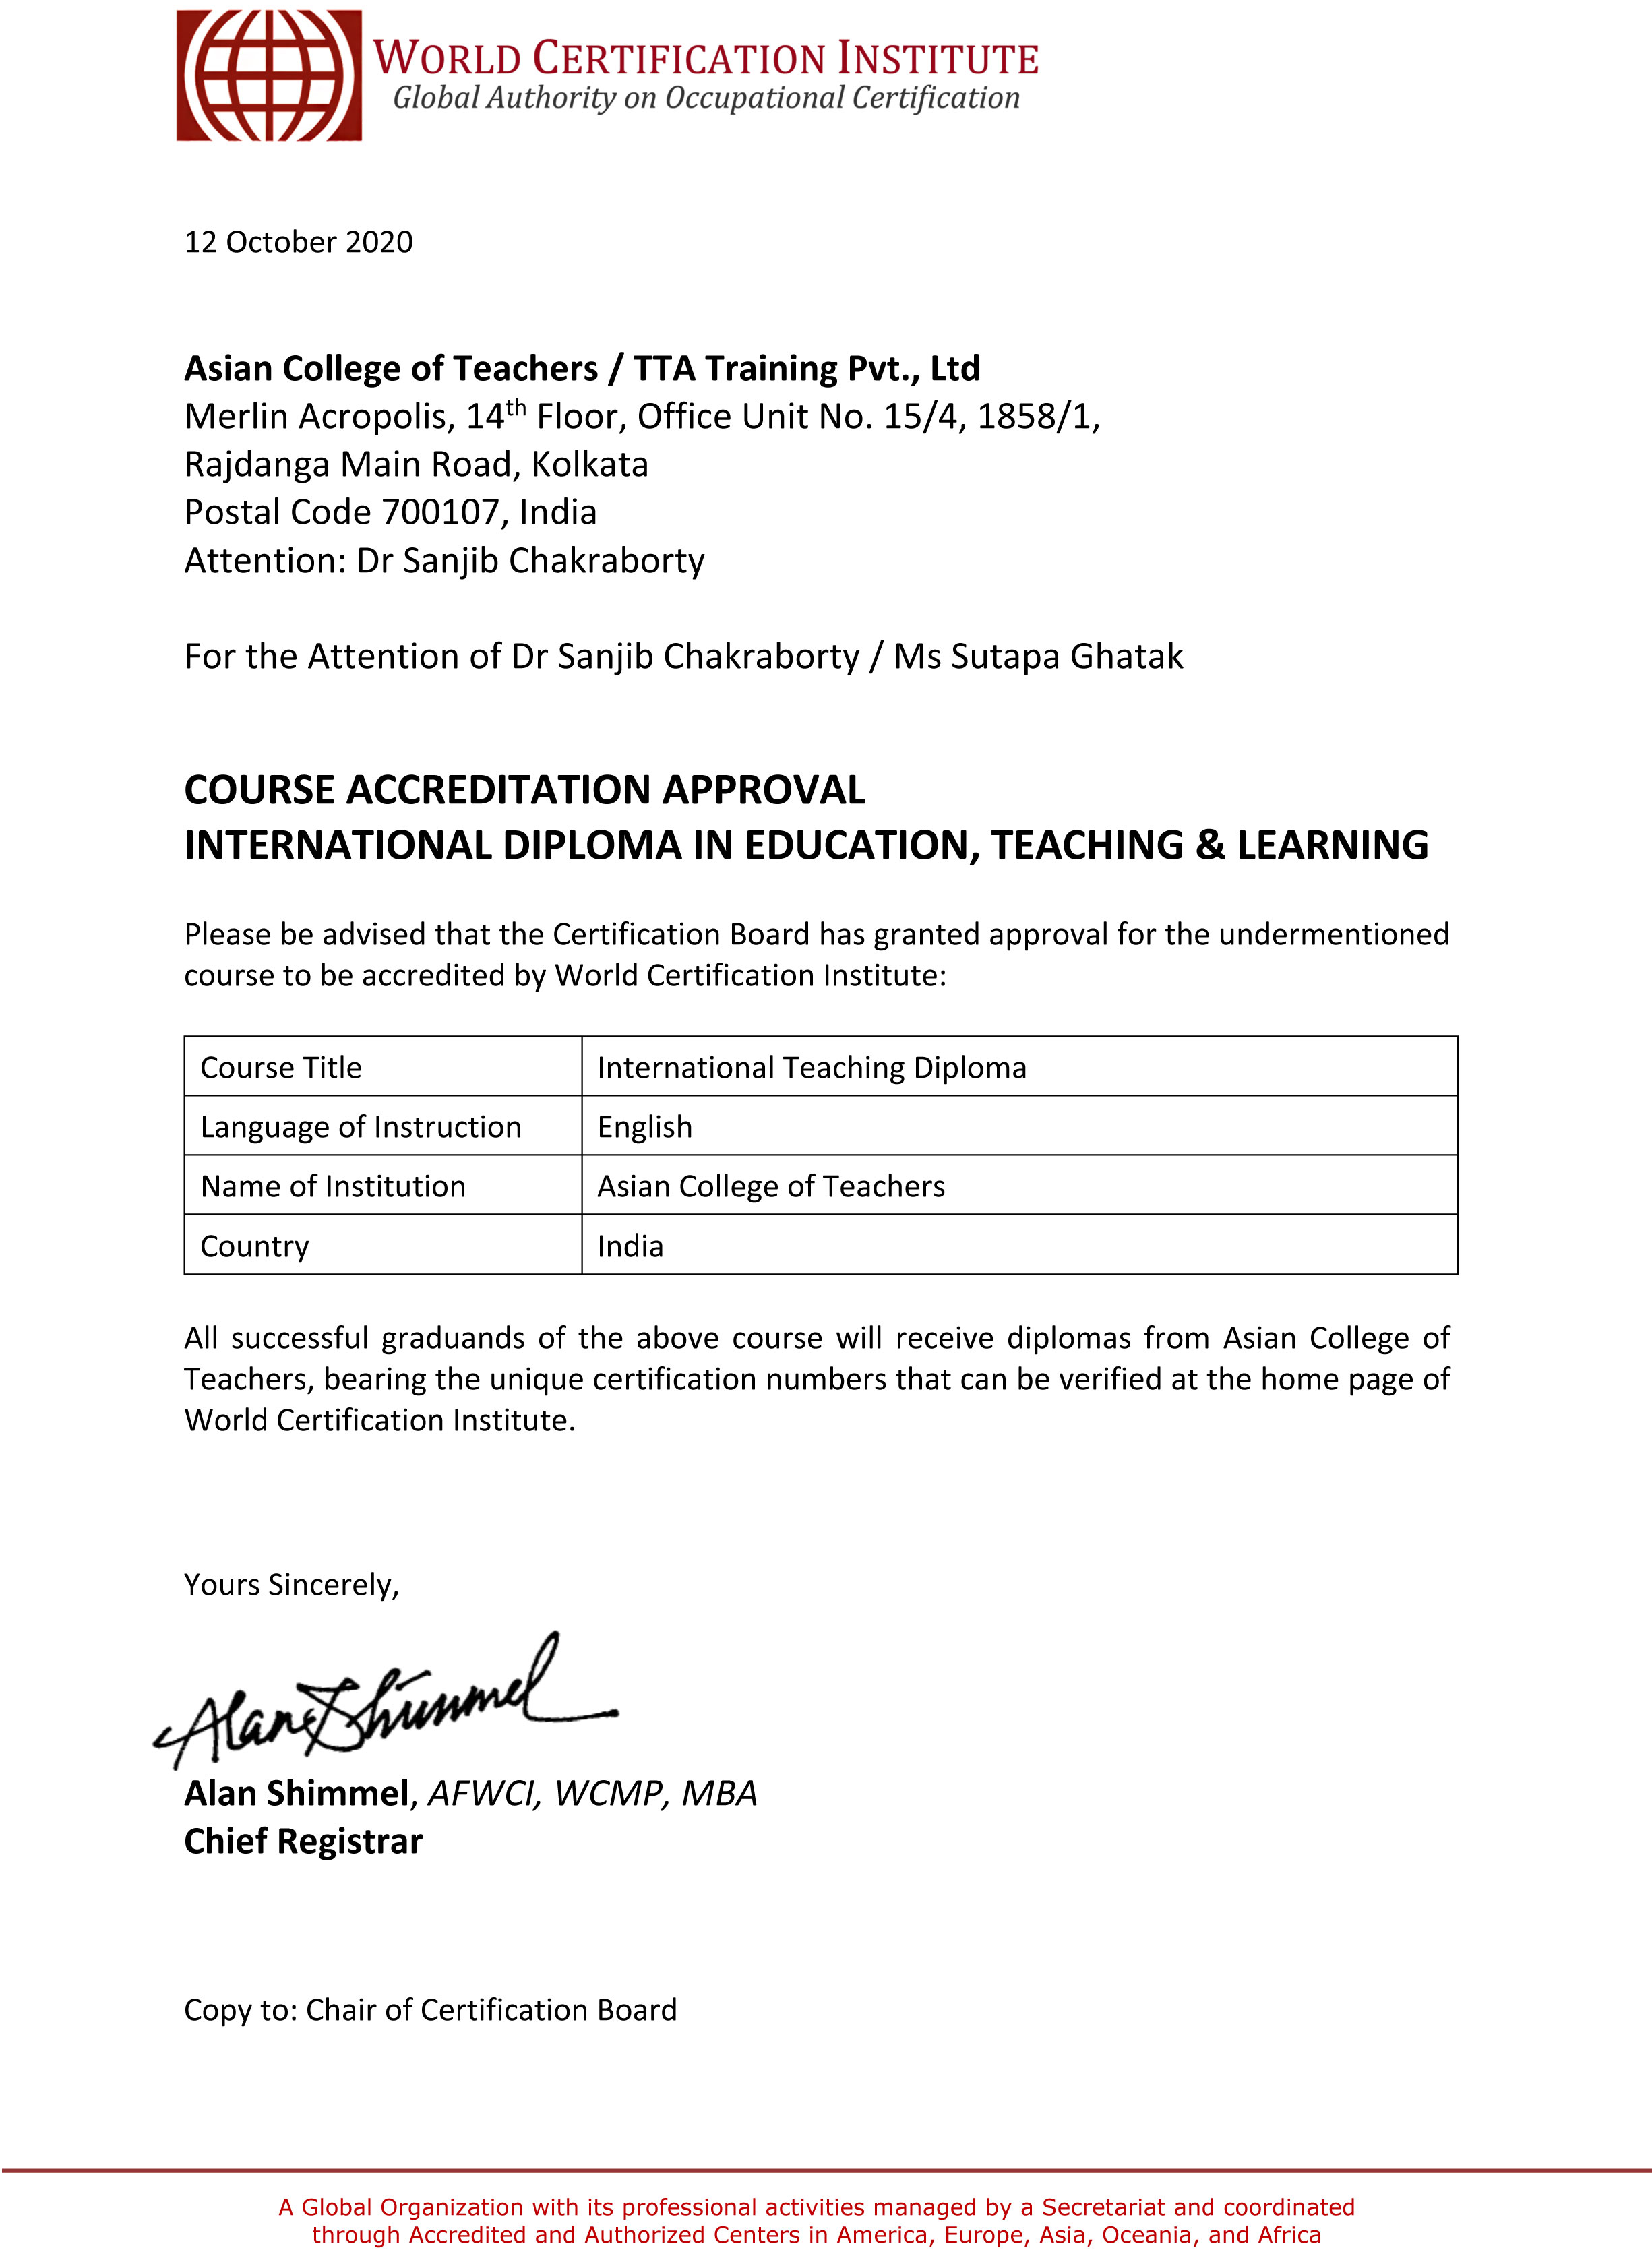 ACT’s International Teaching Diploma Course Accredited by WCI